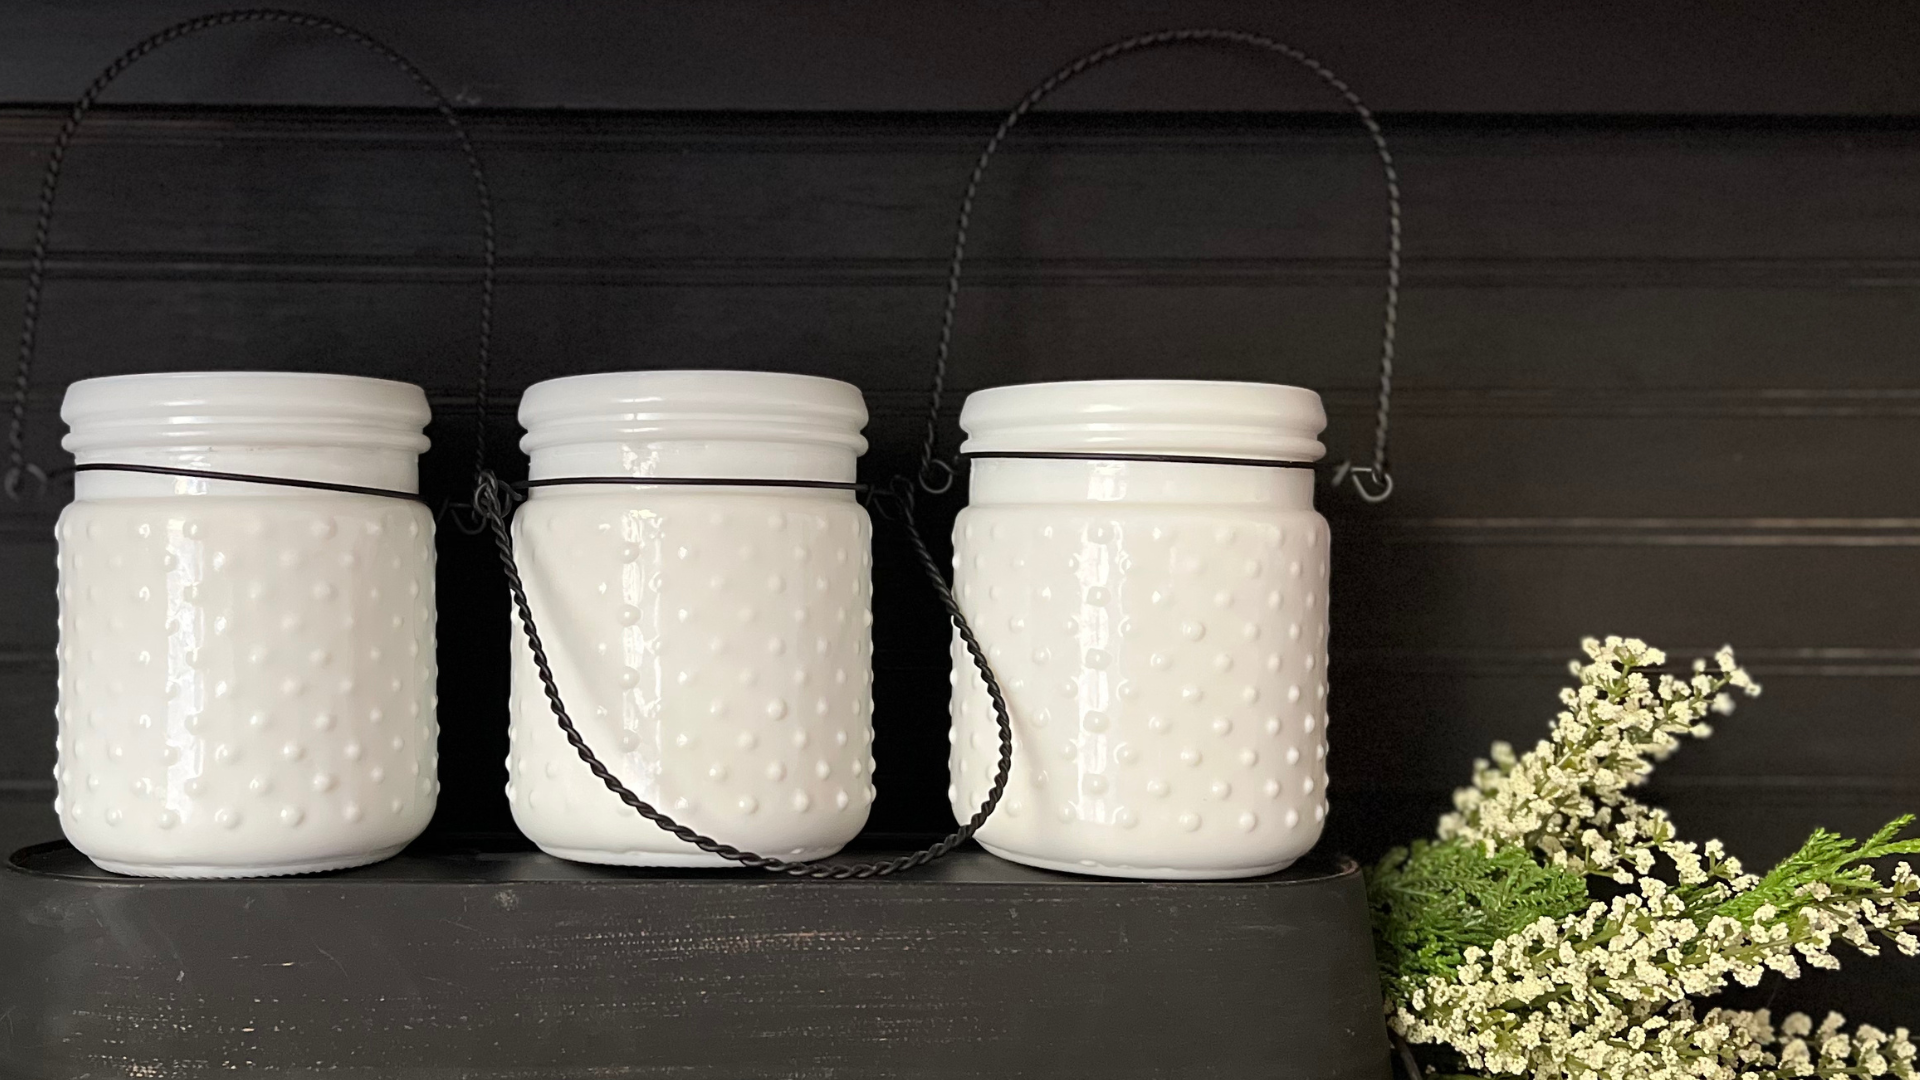 soy candles in white glass hobnail glass inspired by vintage milkglass